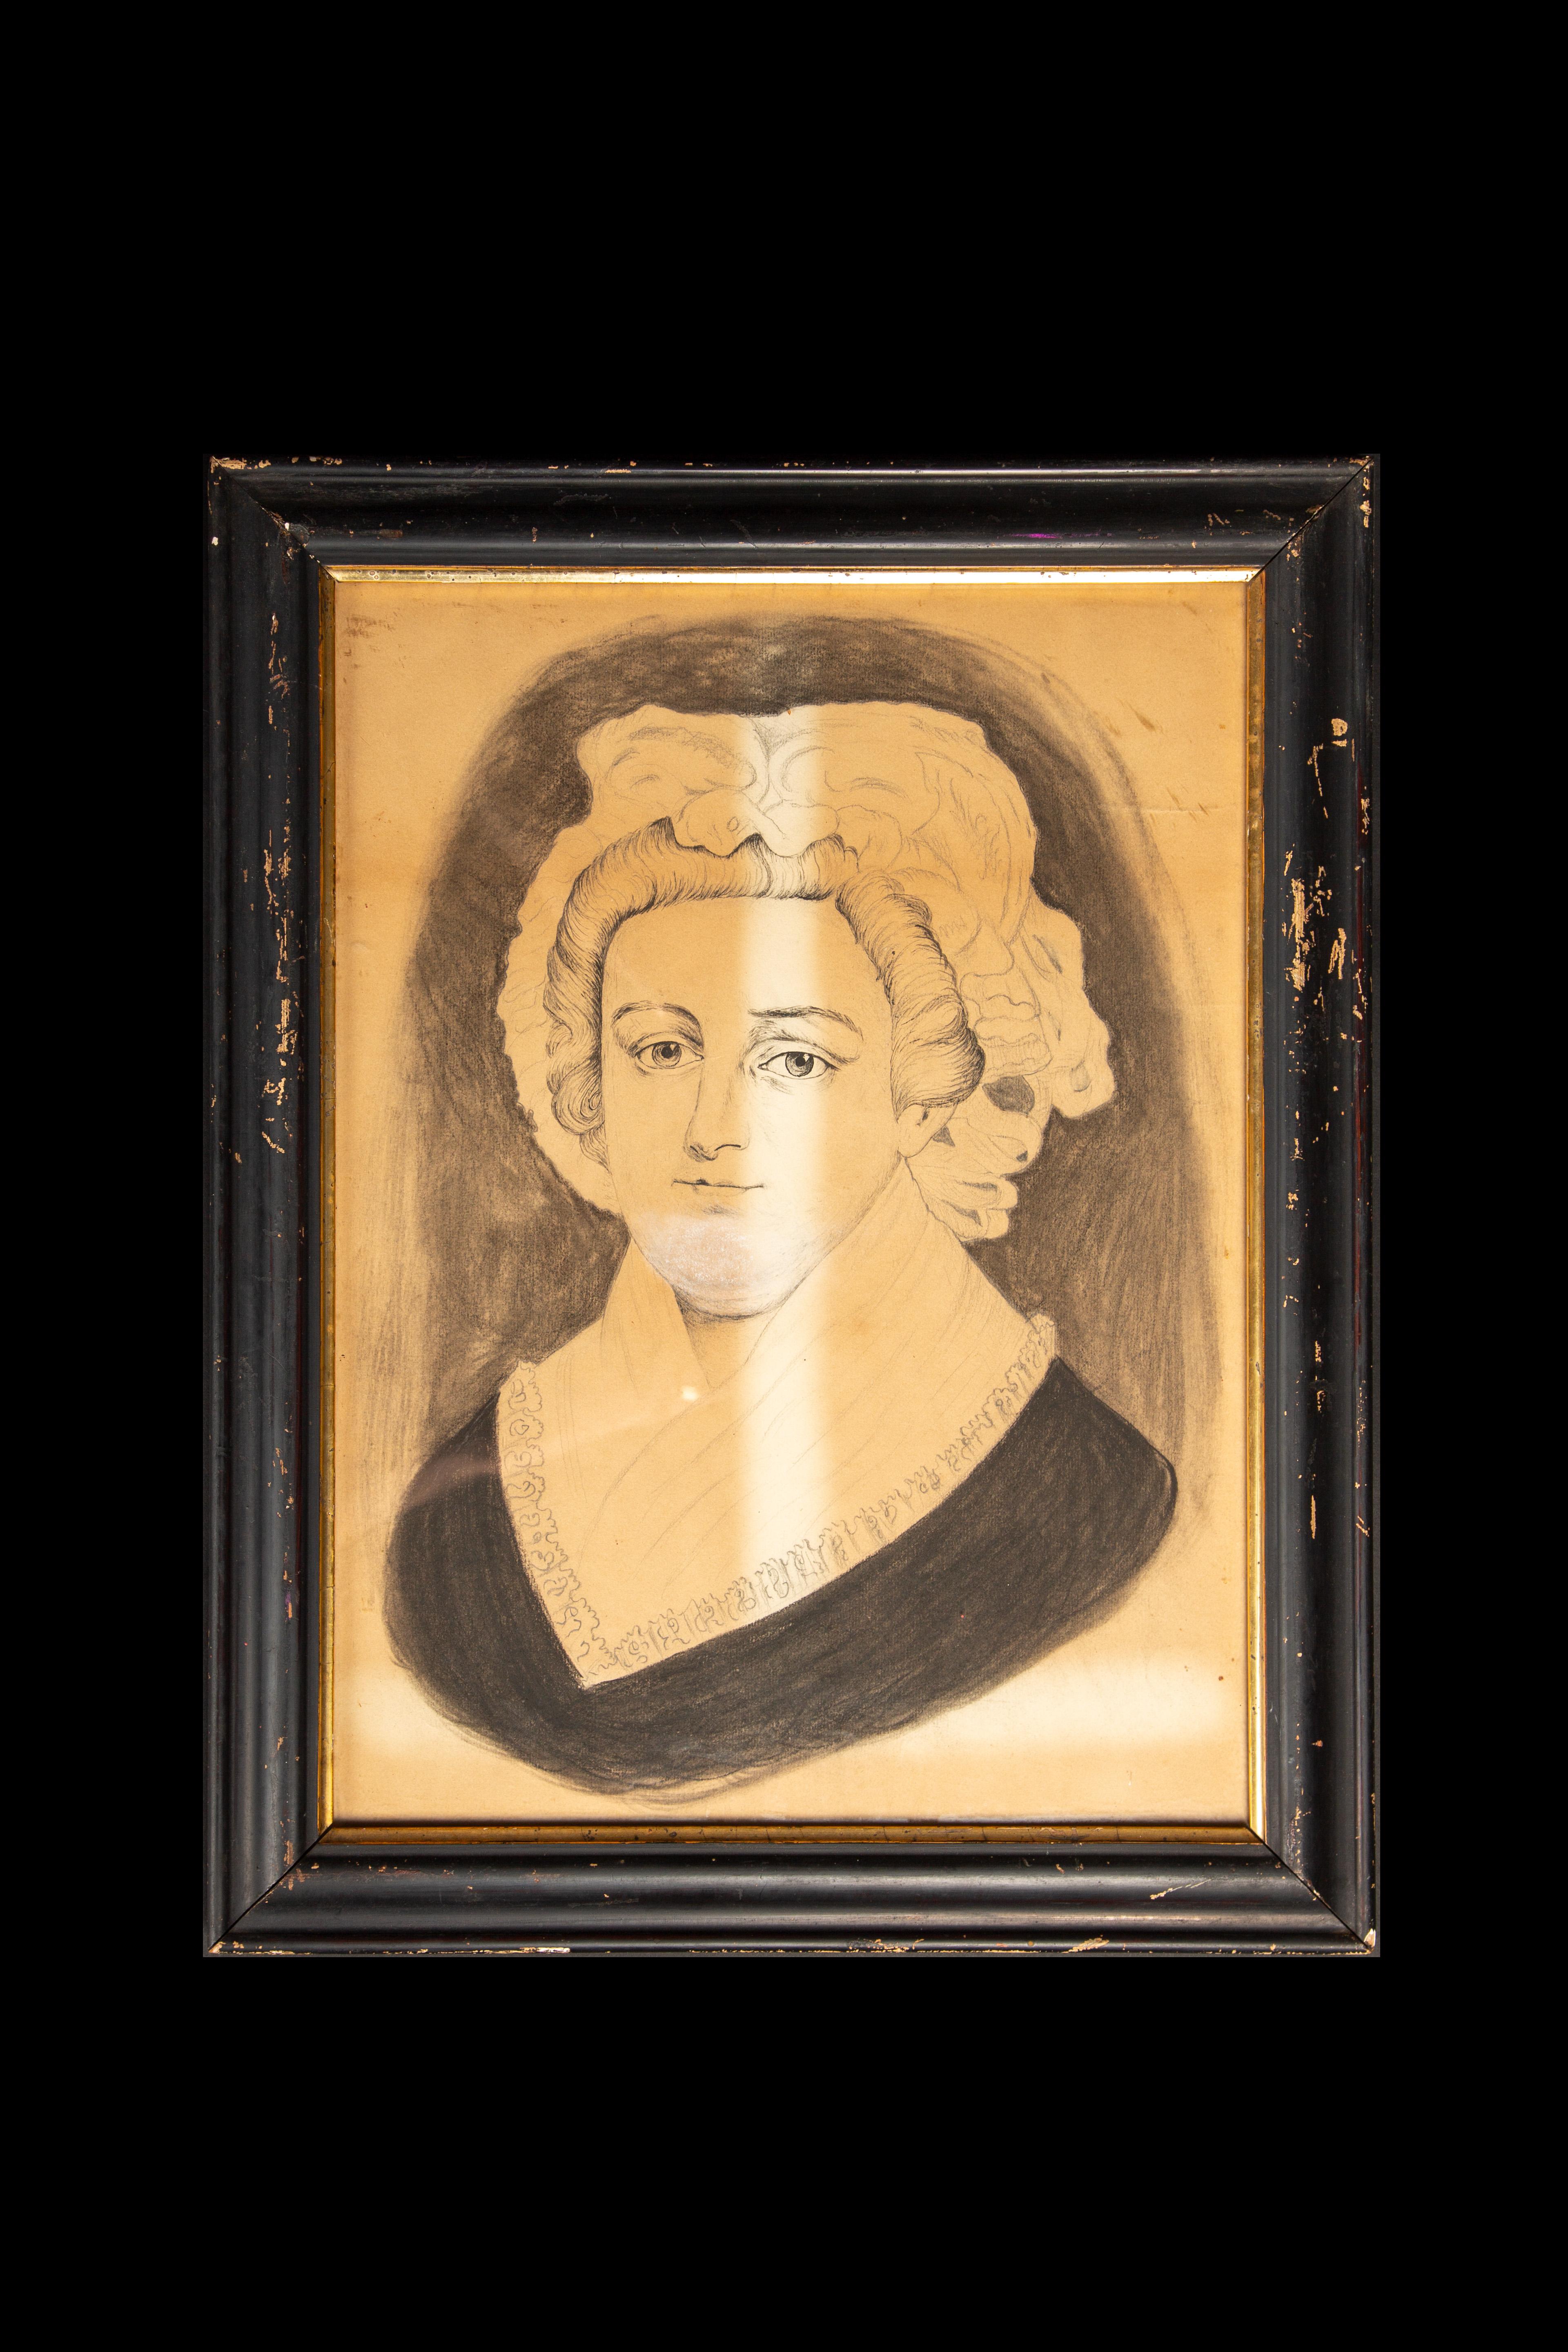  Exquisite 19th-century original framed charcoal portrait capturing the timeless elegance of George and Martha Washington. Skillfully rendered, these drawings evoke the grace and dignity of the iconic first couple of the United States, exuding a